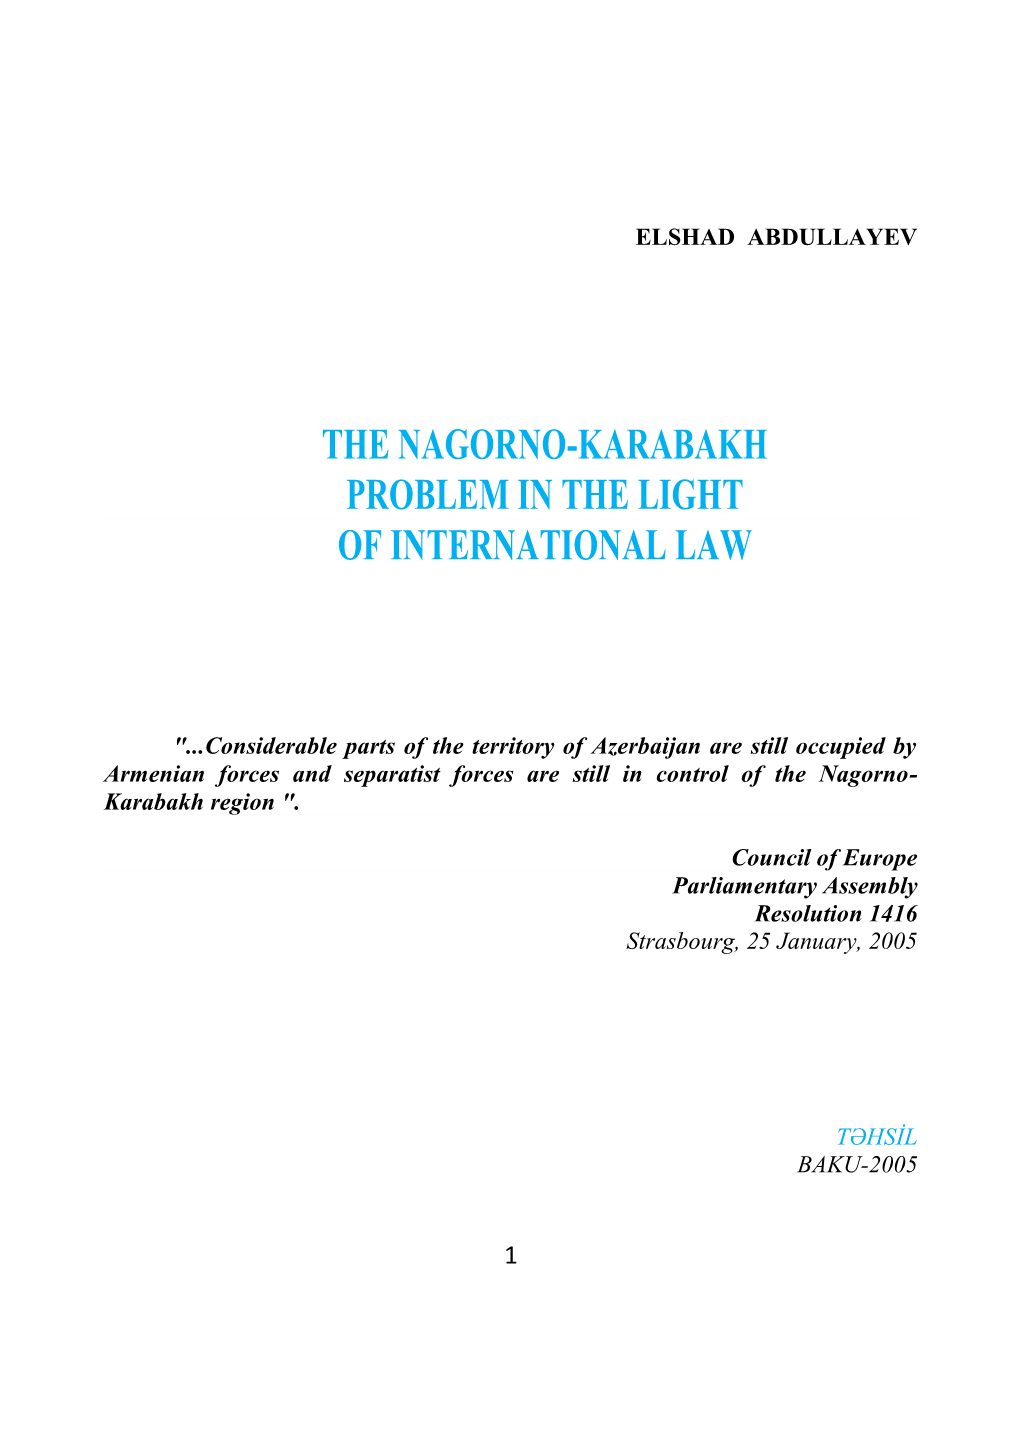 The Nagorno-Karabakh Problem in the Light of International Law